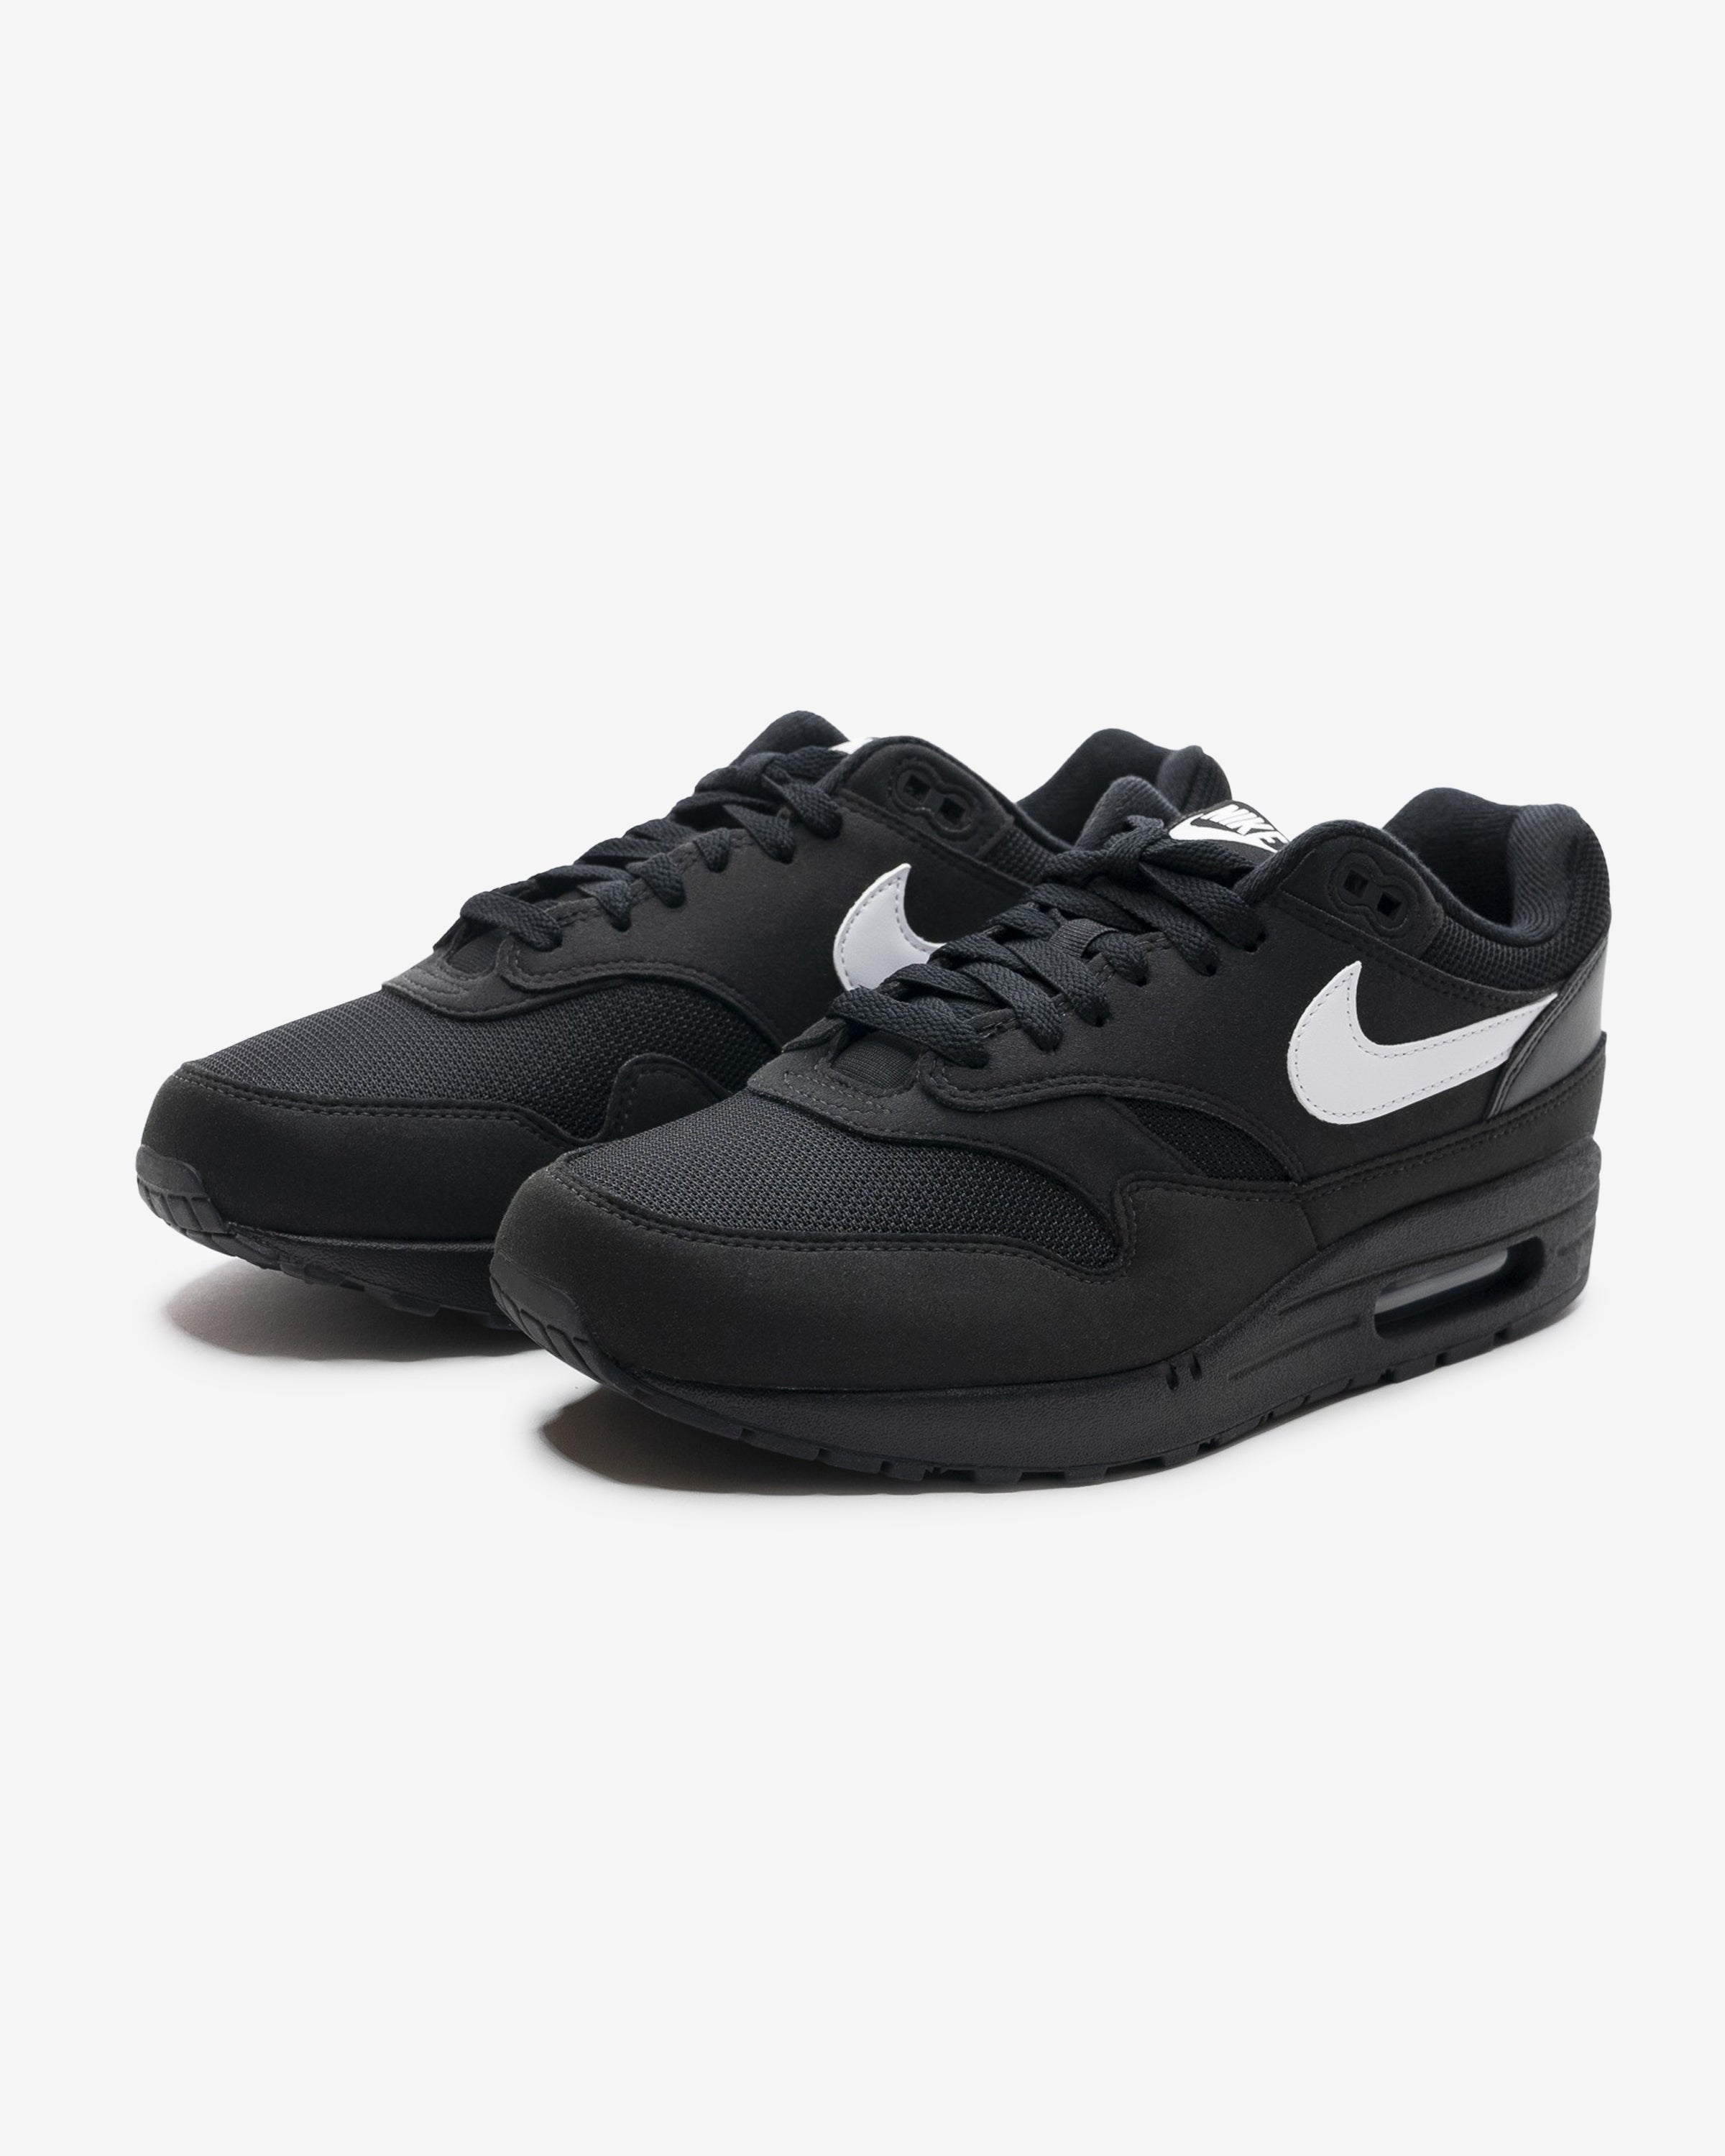 NIKE AIR MAX 1 – UNDEFEATED JAPAN